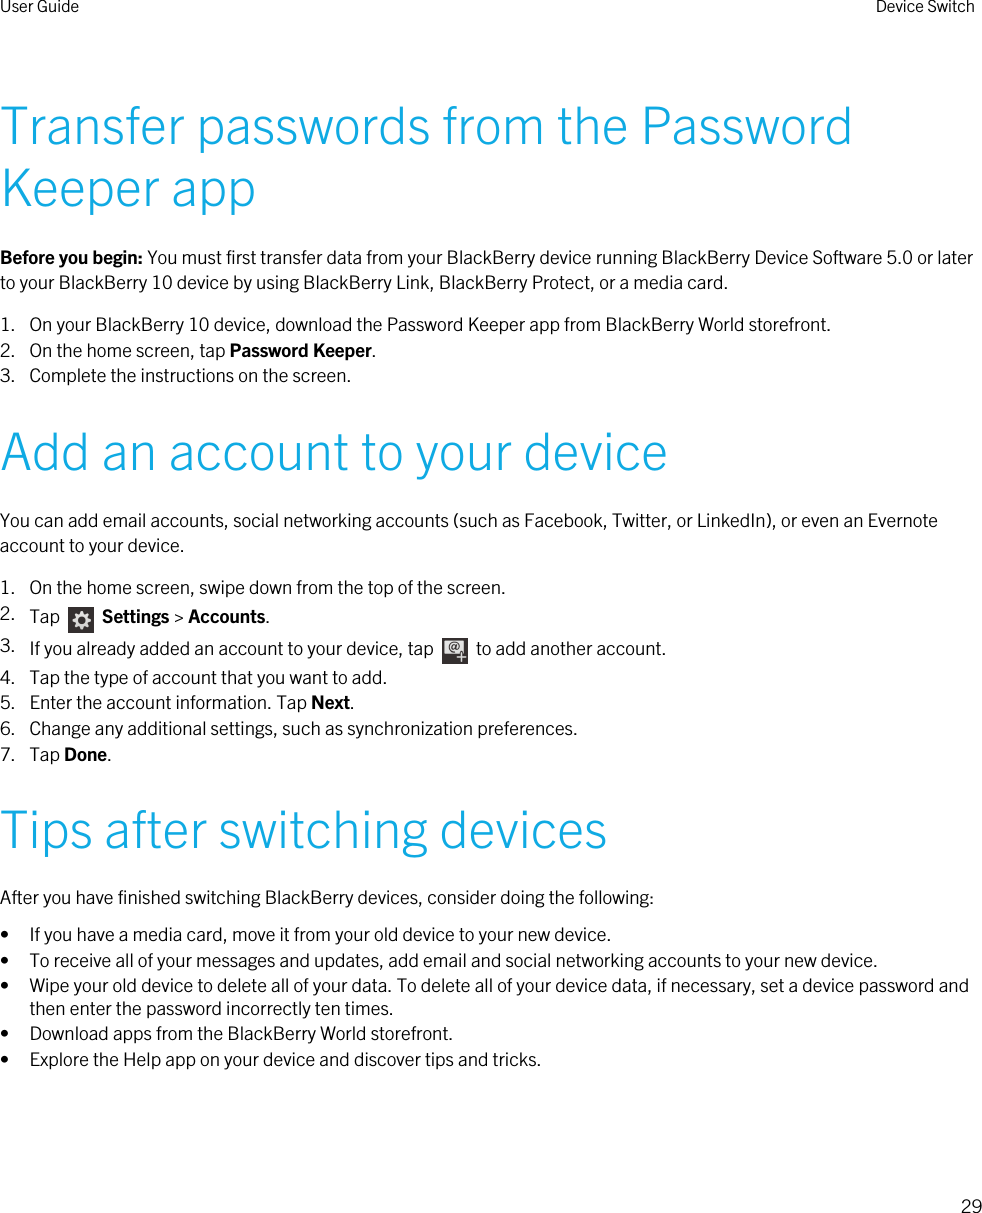 Transfer passwords from the Password Keeper appBefore you begin: You must first transfer data from your BlackBerry device running BlackBerry Device Software 5.0 or later to your BlackBerry 10 device by using BlackBerry Link, BlackBerry Protect, or a media card.1. On your BlackBerry 10 device, download the Password Keeper app from BlackBerry World storefront.2. On the home screen, tap Password Keeper.3. Complete the instructions on the screen.Add an account to your deviceYou can add email accounts, social networking accounts (such as Facebook, Twitter, or LinkedIn), or even an Evernote account to your device.1. On the home screen, swipe down from the top of the screen.2. Tap    Settings &gt; Accounts.3. If you already added an account to your device, tap    to add another account.4. Tap the type of account that you want to add.5. Enter the account information. Tap Next.6. Change any additional settings, such as synchronization preferences.7. Tap Done.Tips after switching devicesAfter you have finished switching BlackBerry devices, consider doing the following:• If you have a media card, move it from your old device to your new device.• To receive all of your messages and updates, add email and social networking accounts to your new device.• Wipe your old device to delete all of your data. To delete all of your device data, if necessary, set a device password and then enter the password incorrectly ten times.• Download apps from the BlackBerry World storefront.• Explore the Help app on your device and discover tips and tricks.User Guide Device Switch29 